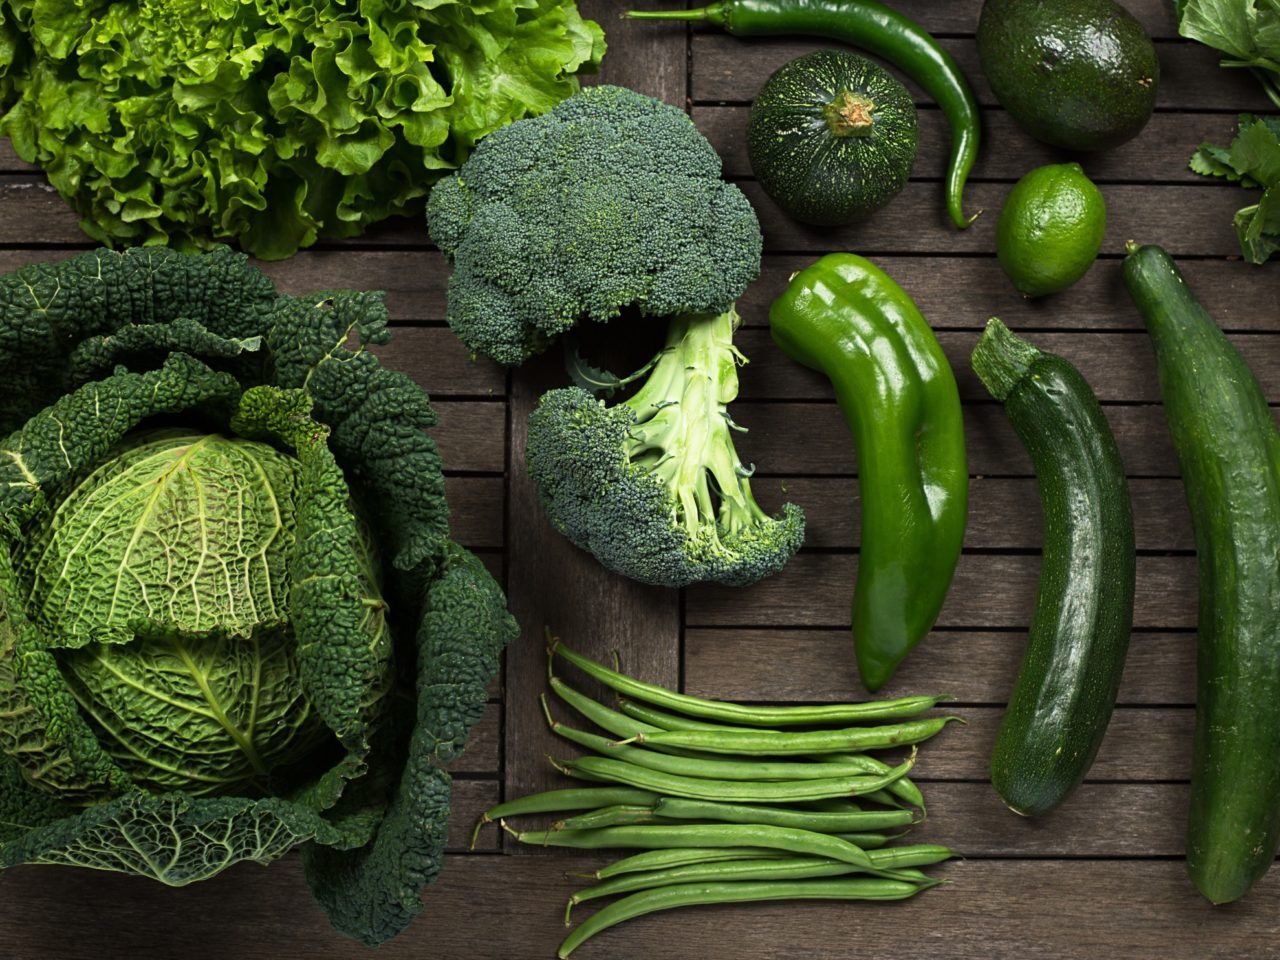 What is the benefit of eating green and leafy vegetables?